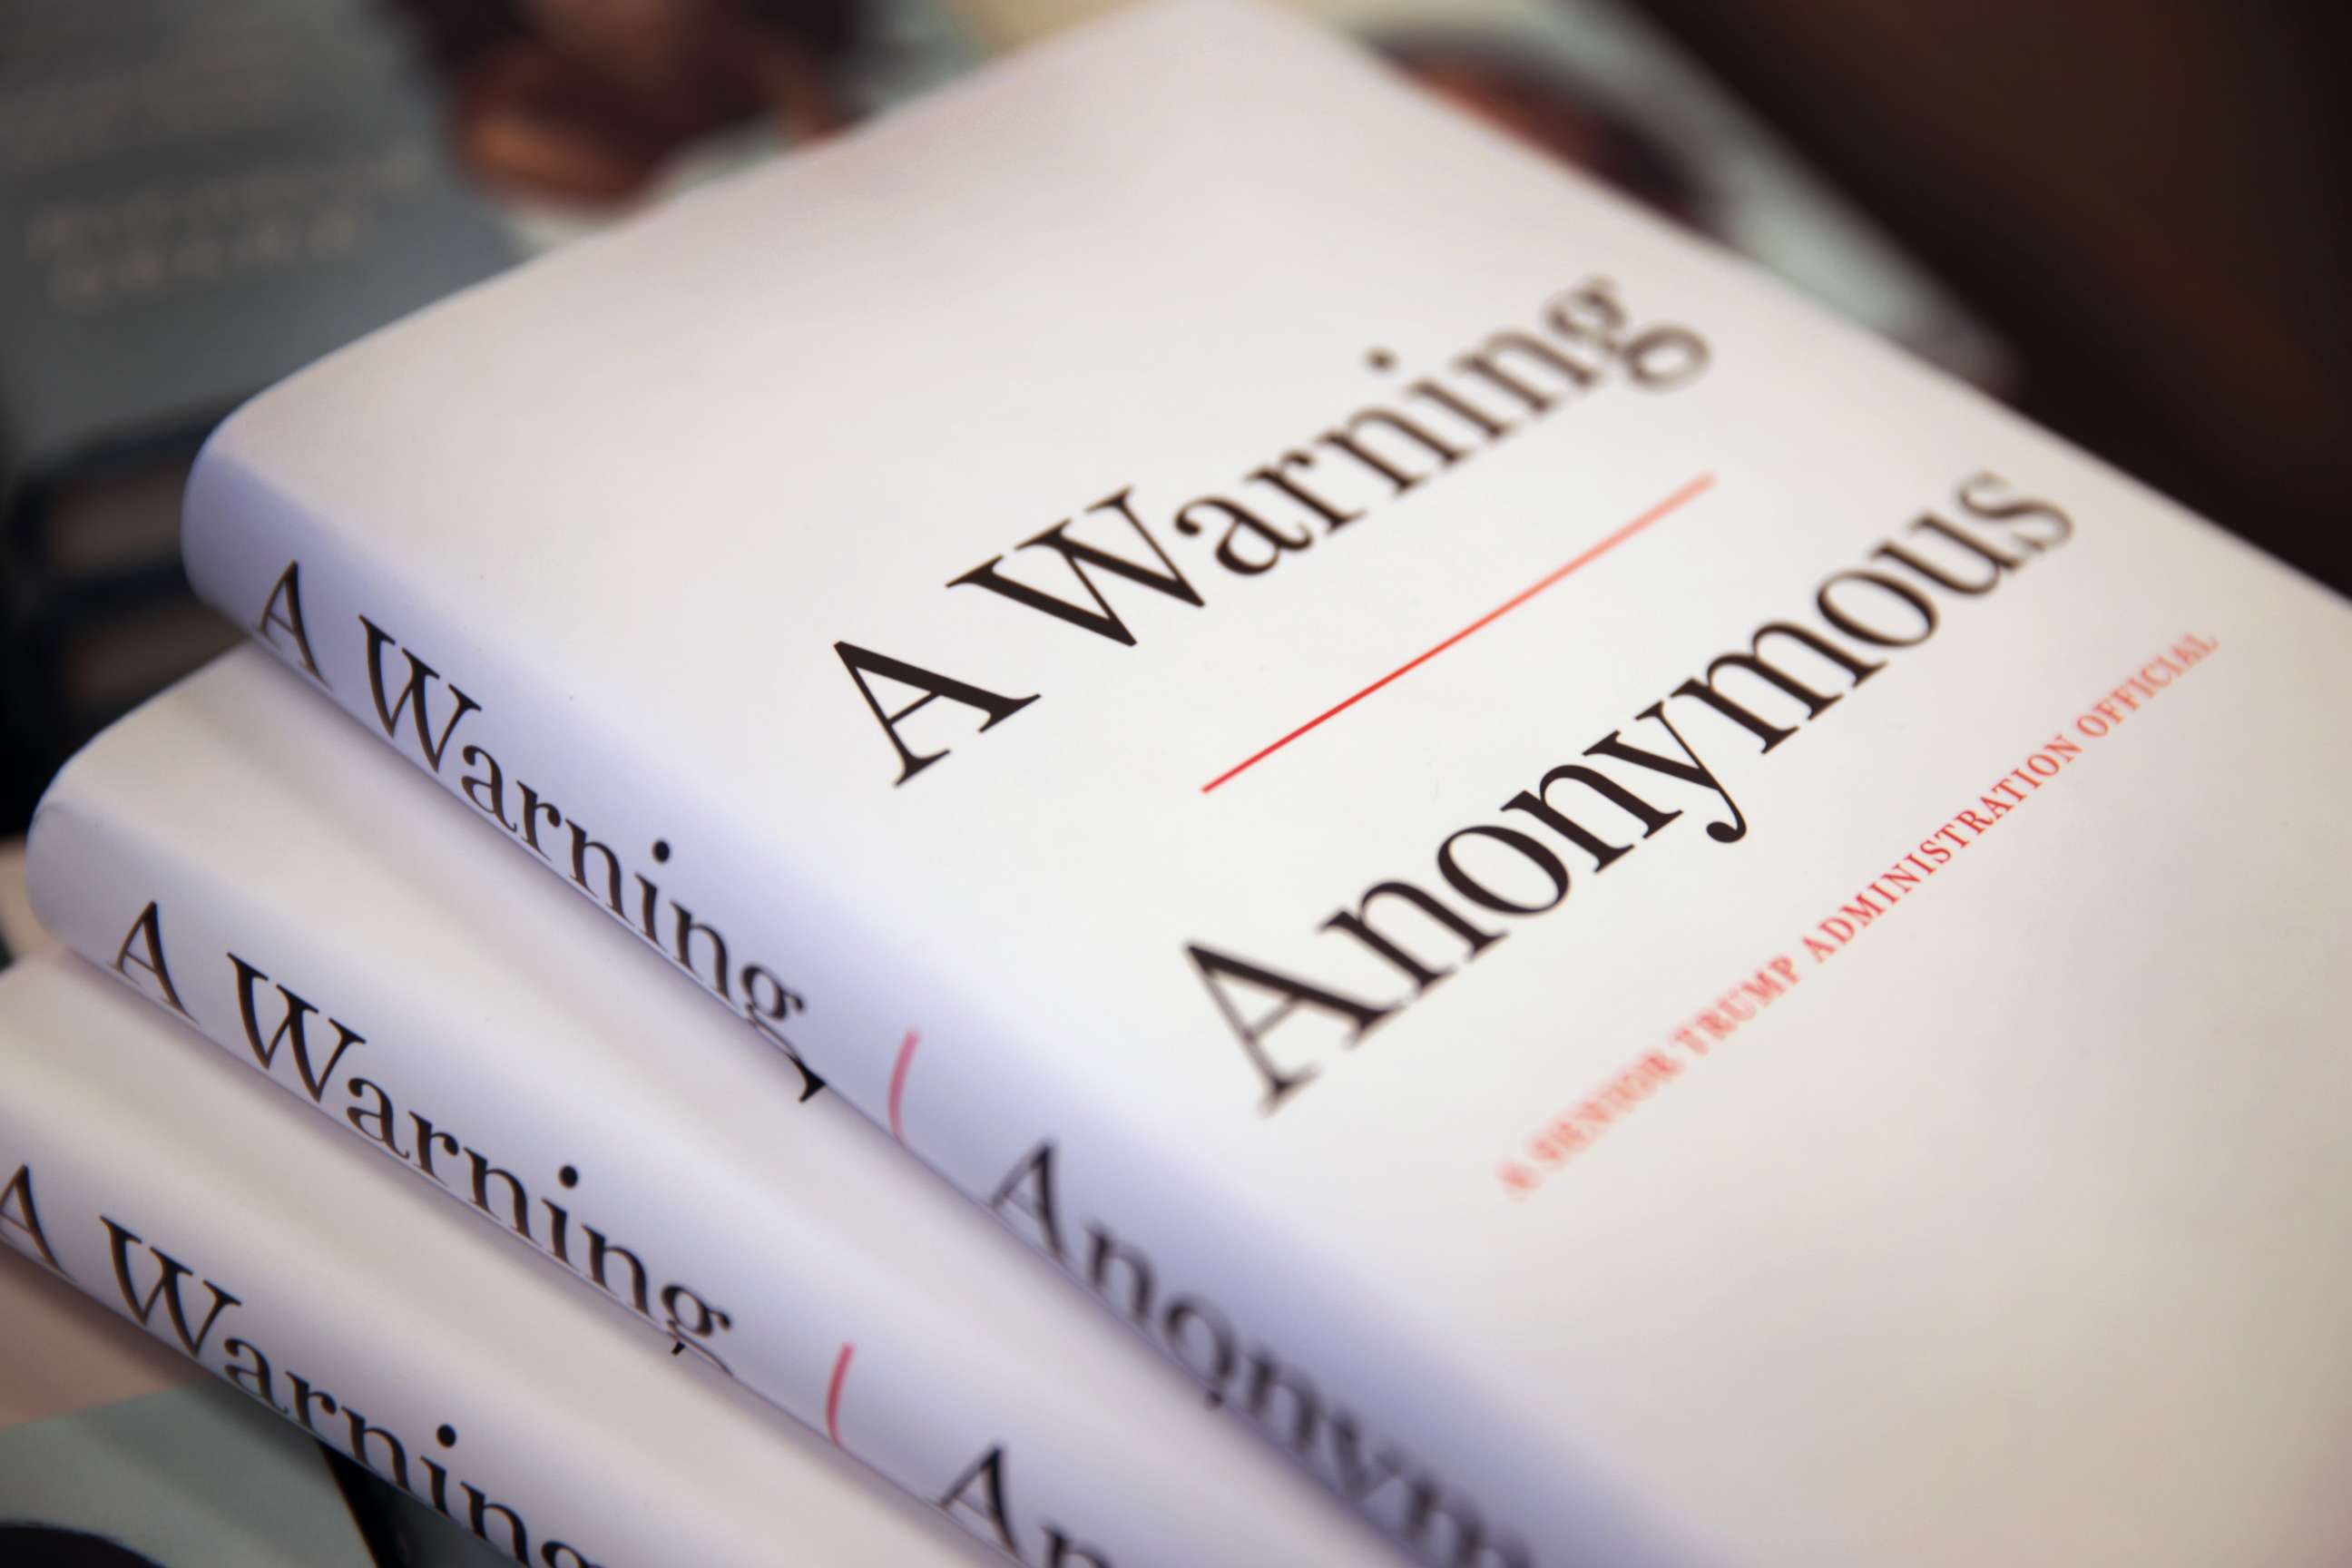 PHOTO: Copies of "A Warning" by Anonymous are offered for sale at a Barnes &amp; Noble store on Nov. 19, 2019 in Chicago.